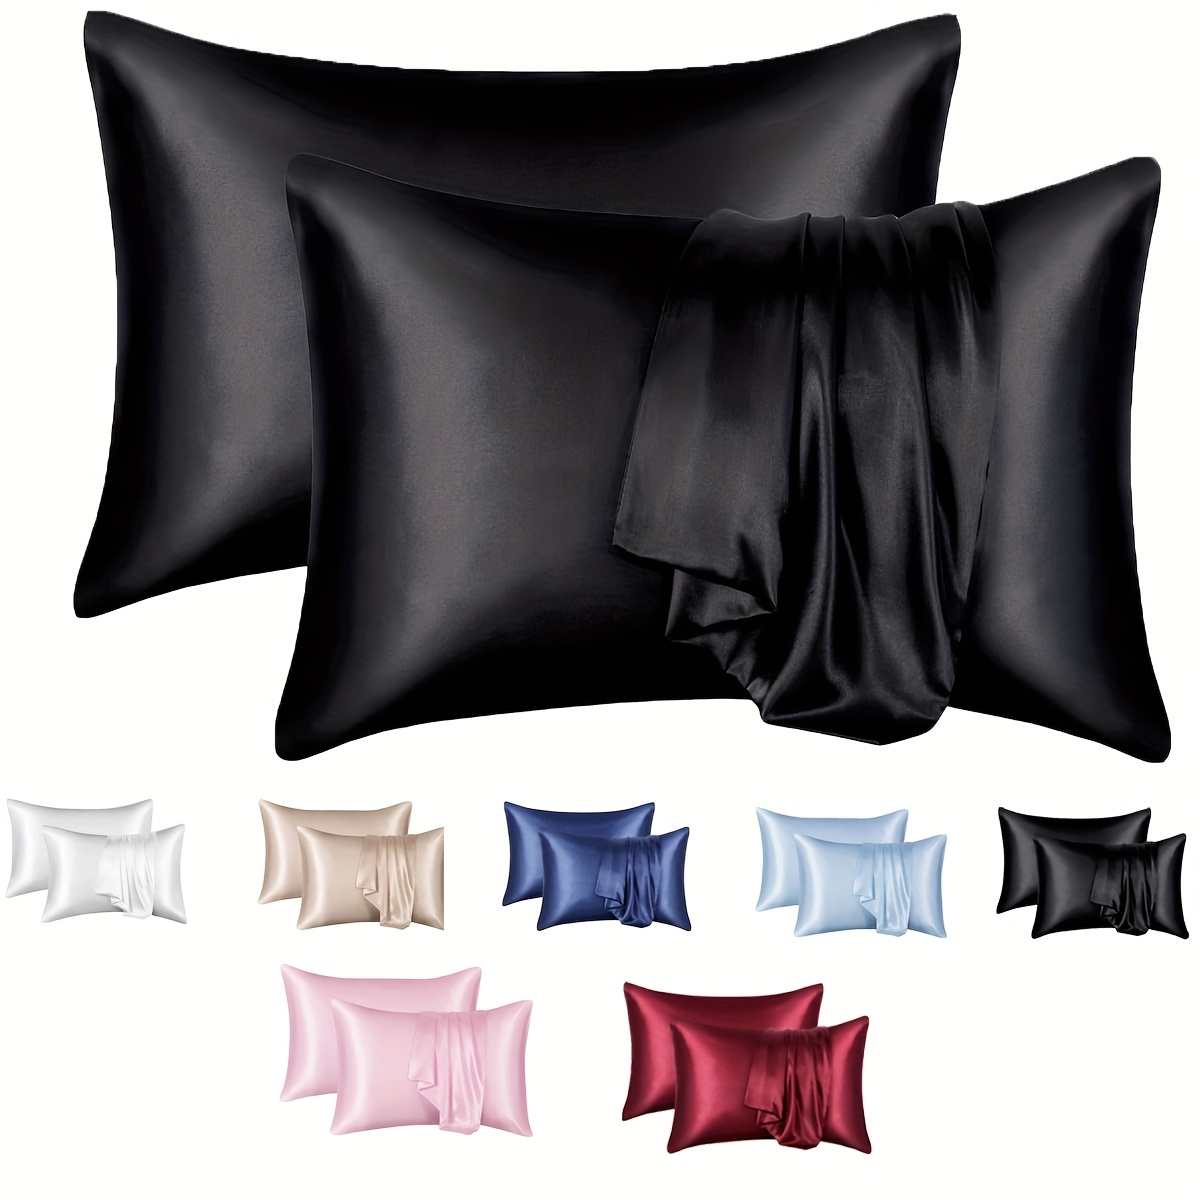 

2pcs Satin Pillowcase For Hair And Skin, Soft Pillowcase, Premium Quality Envelope Pillow Protector For Bedroom Sofa Dorm Room Home Decor, Without Pillow Core